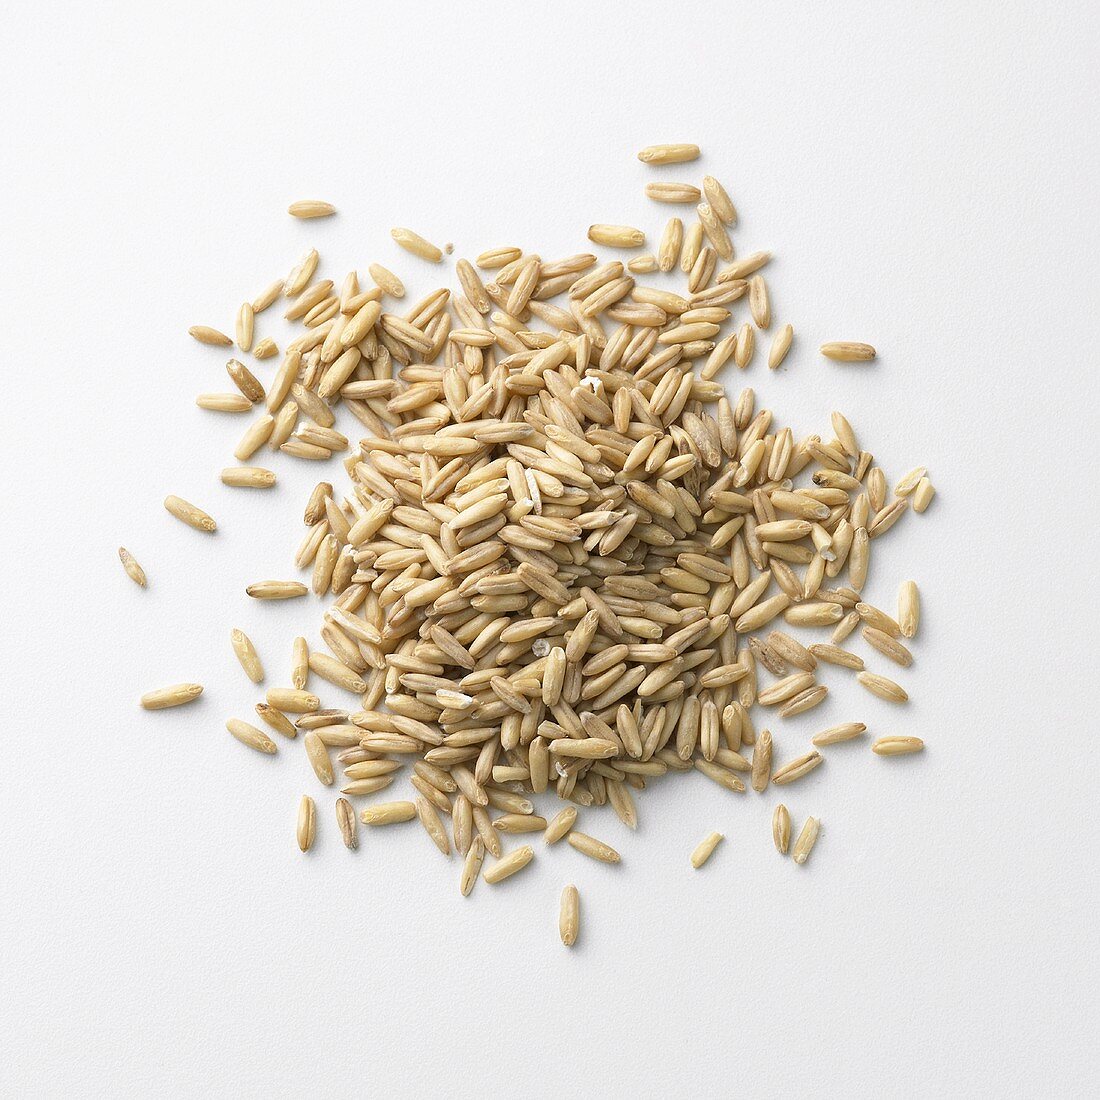 A Small Pile of Oats